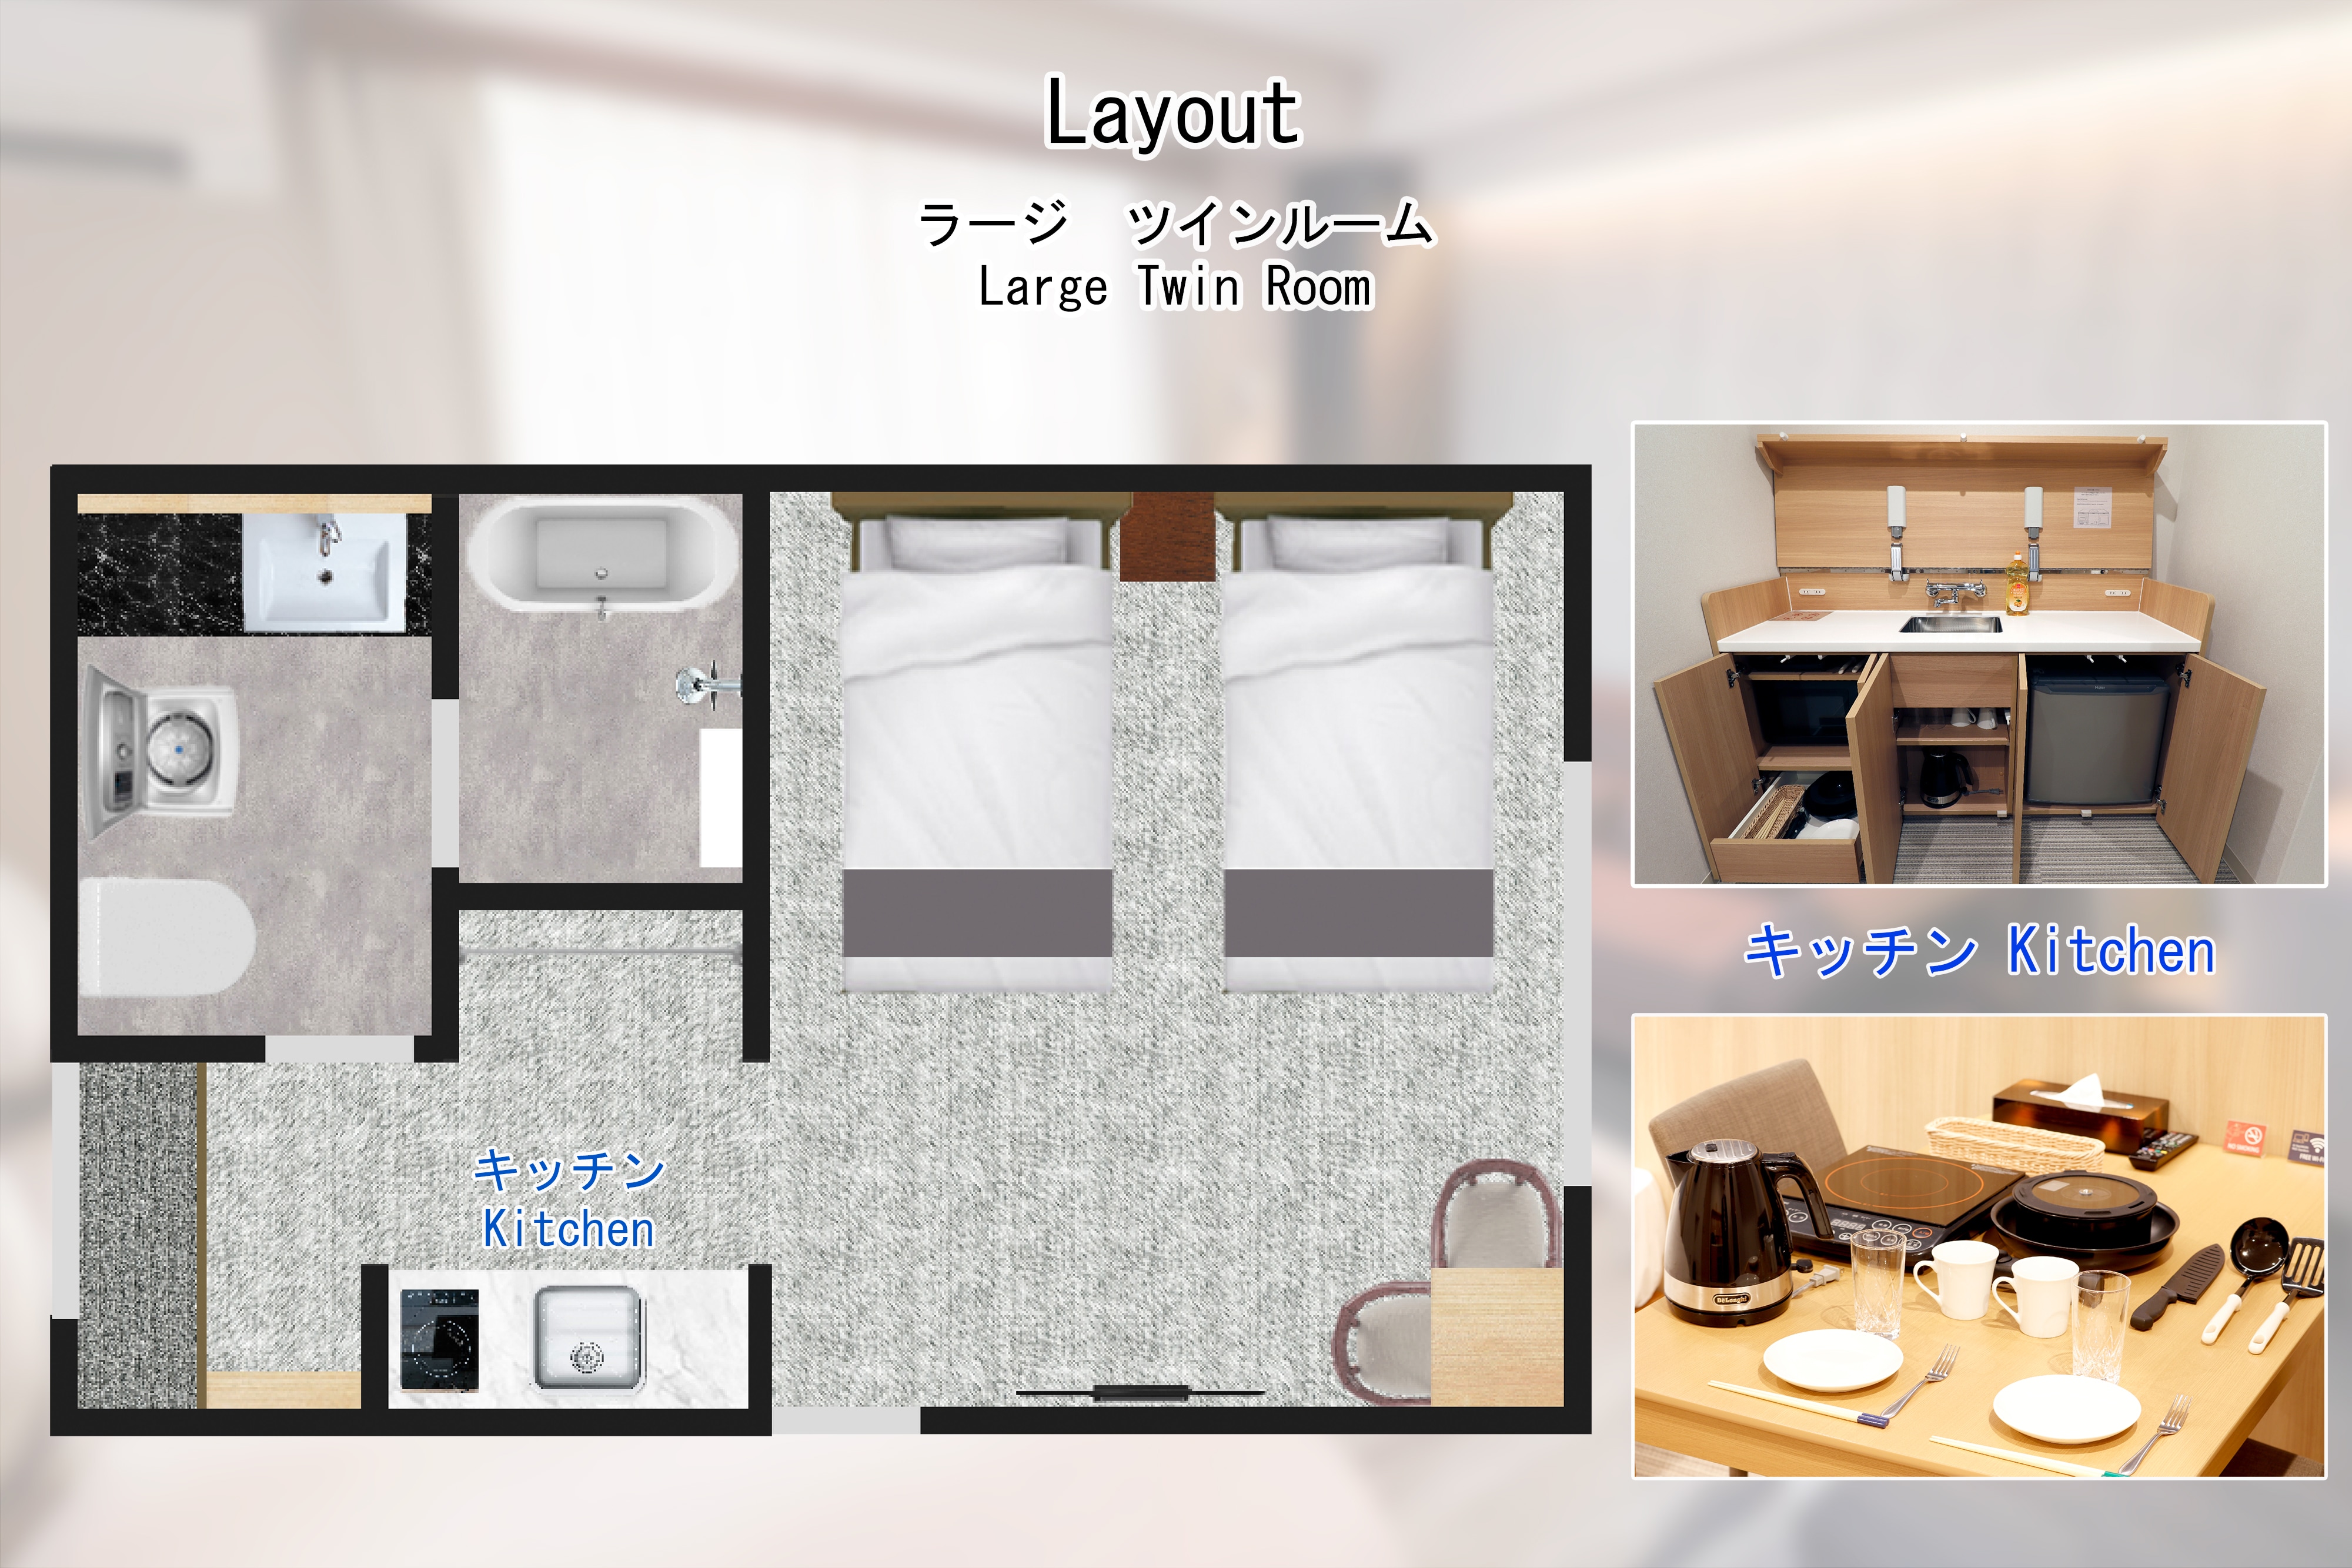 Large twin room ◆ 25 sqm ◆ 2 single beds 113cm & times; 2